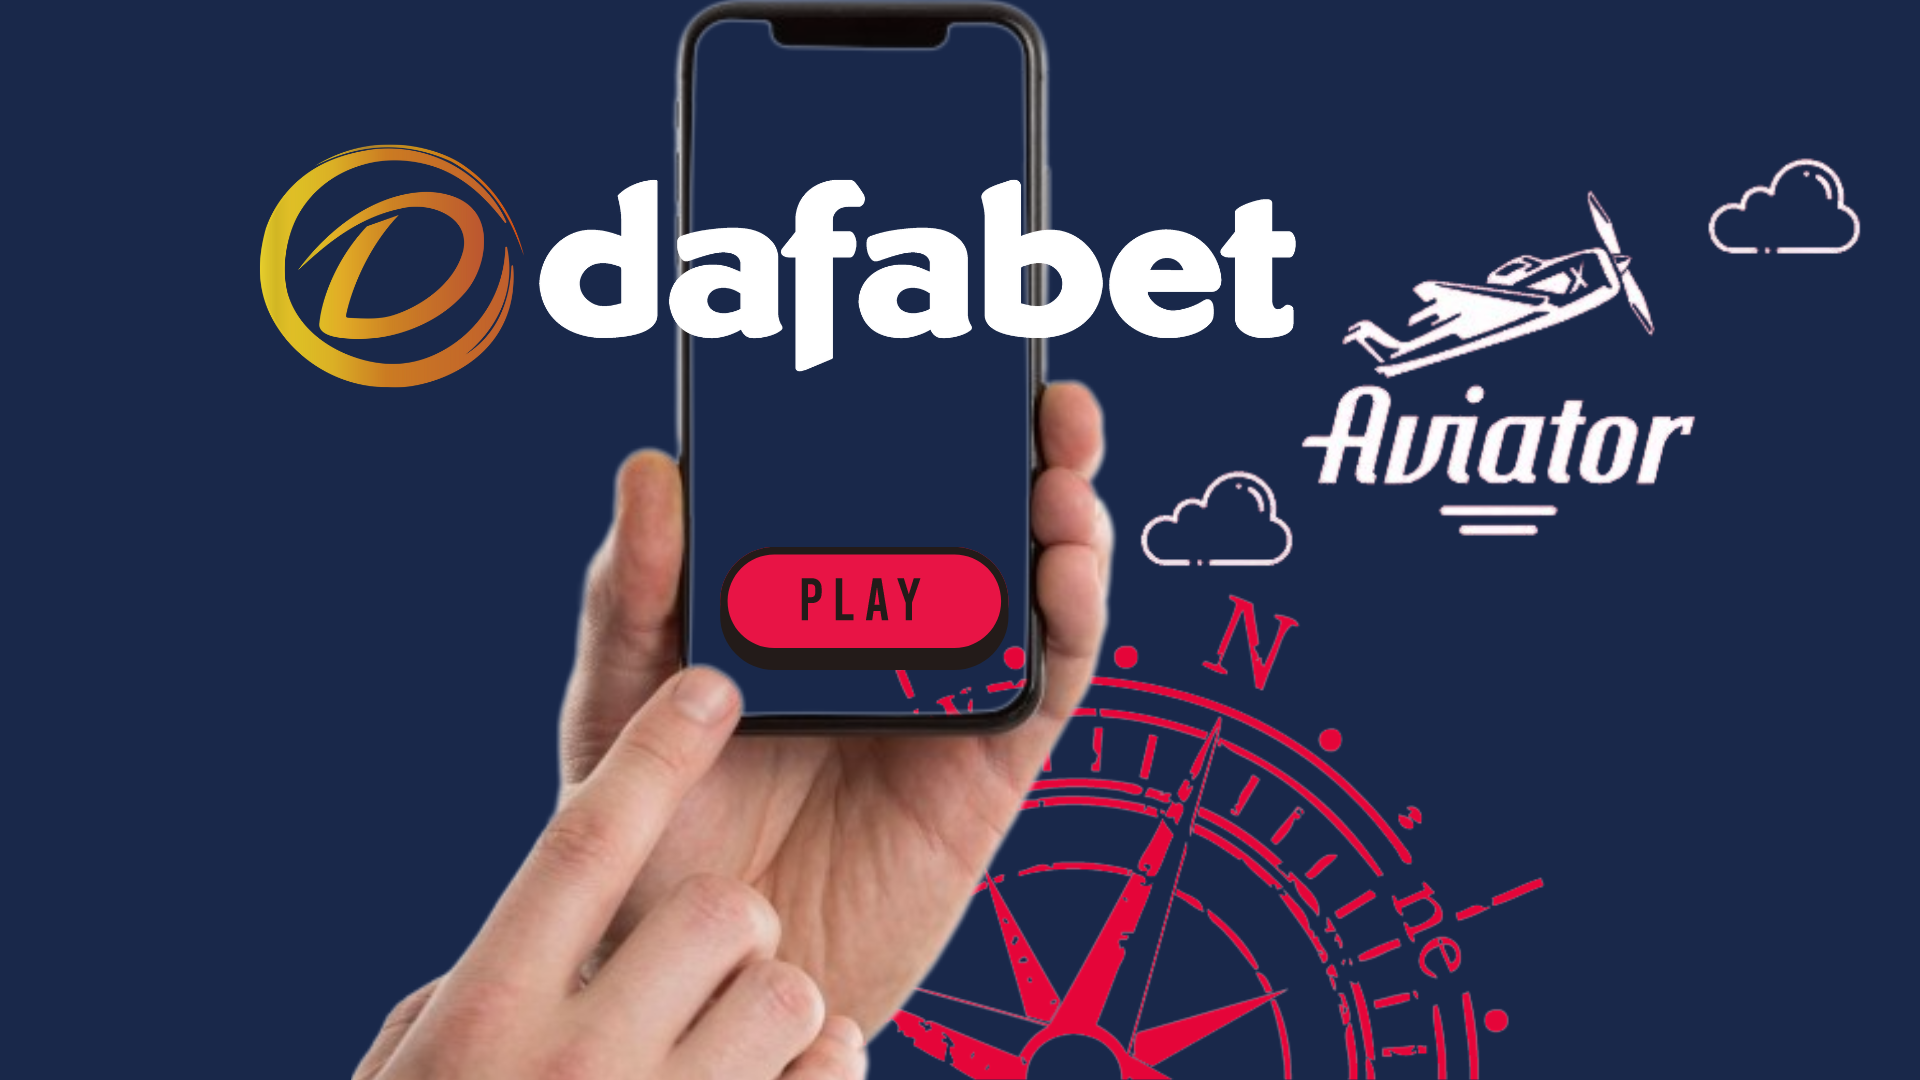 Logos of the Aviator game and Dafabet casino, and a hand holding smartphone